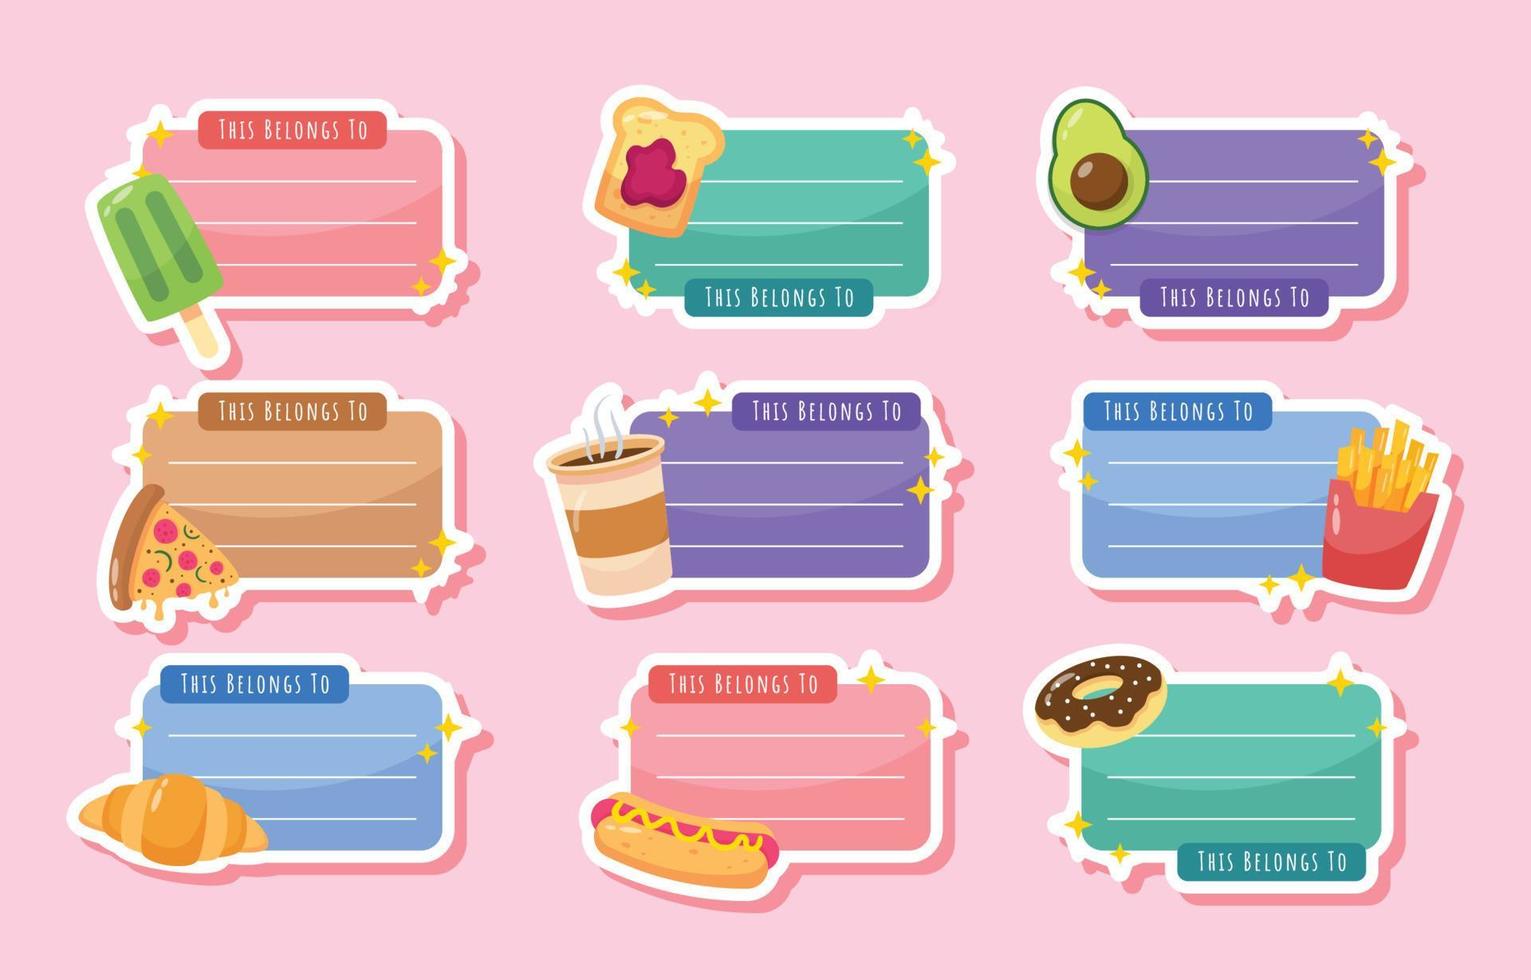 Cute Food Belongs to Sticker Collection vector